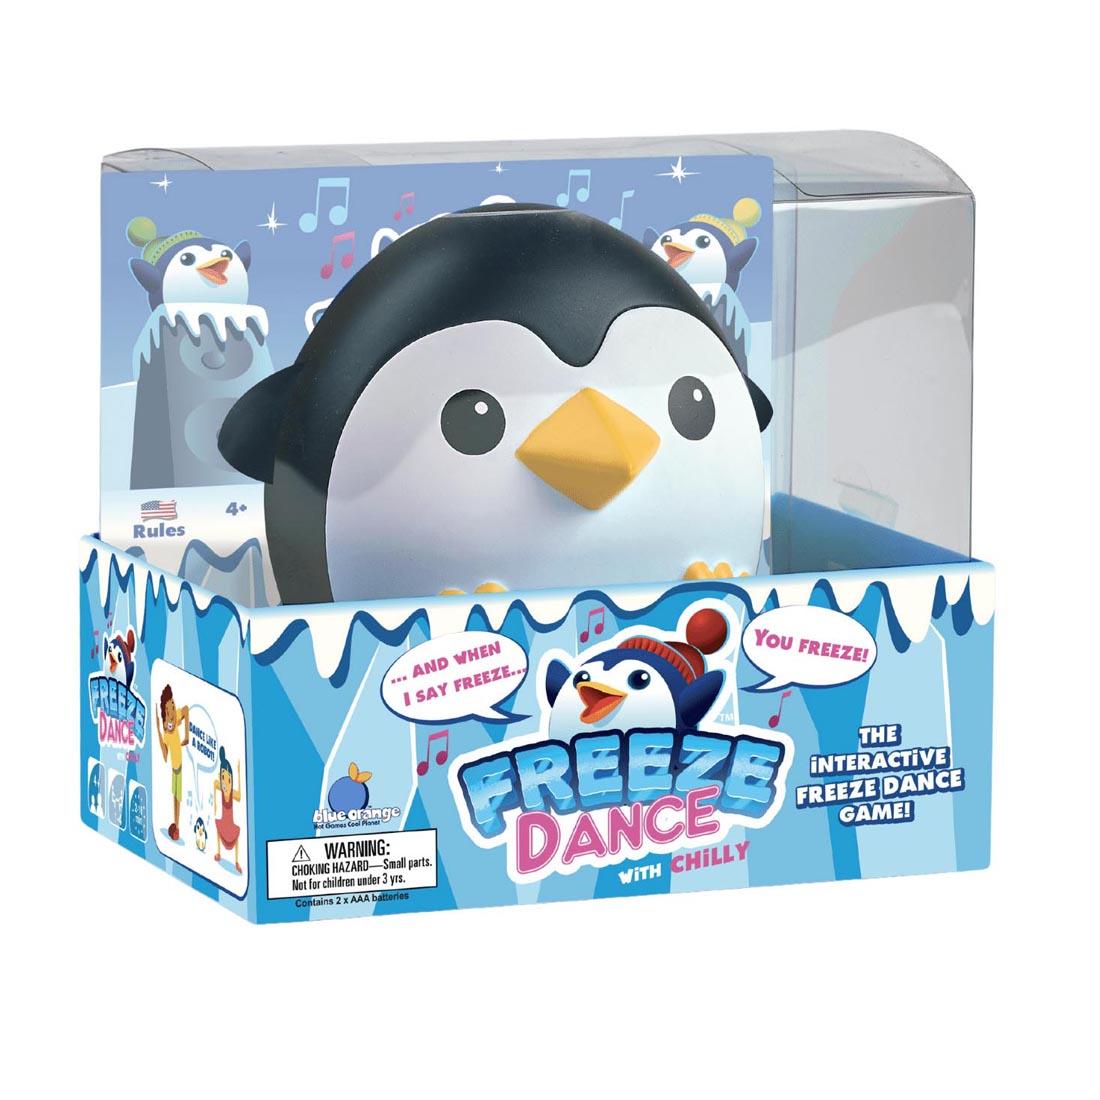 Freeze Dance With Chilly Game in package